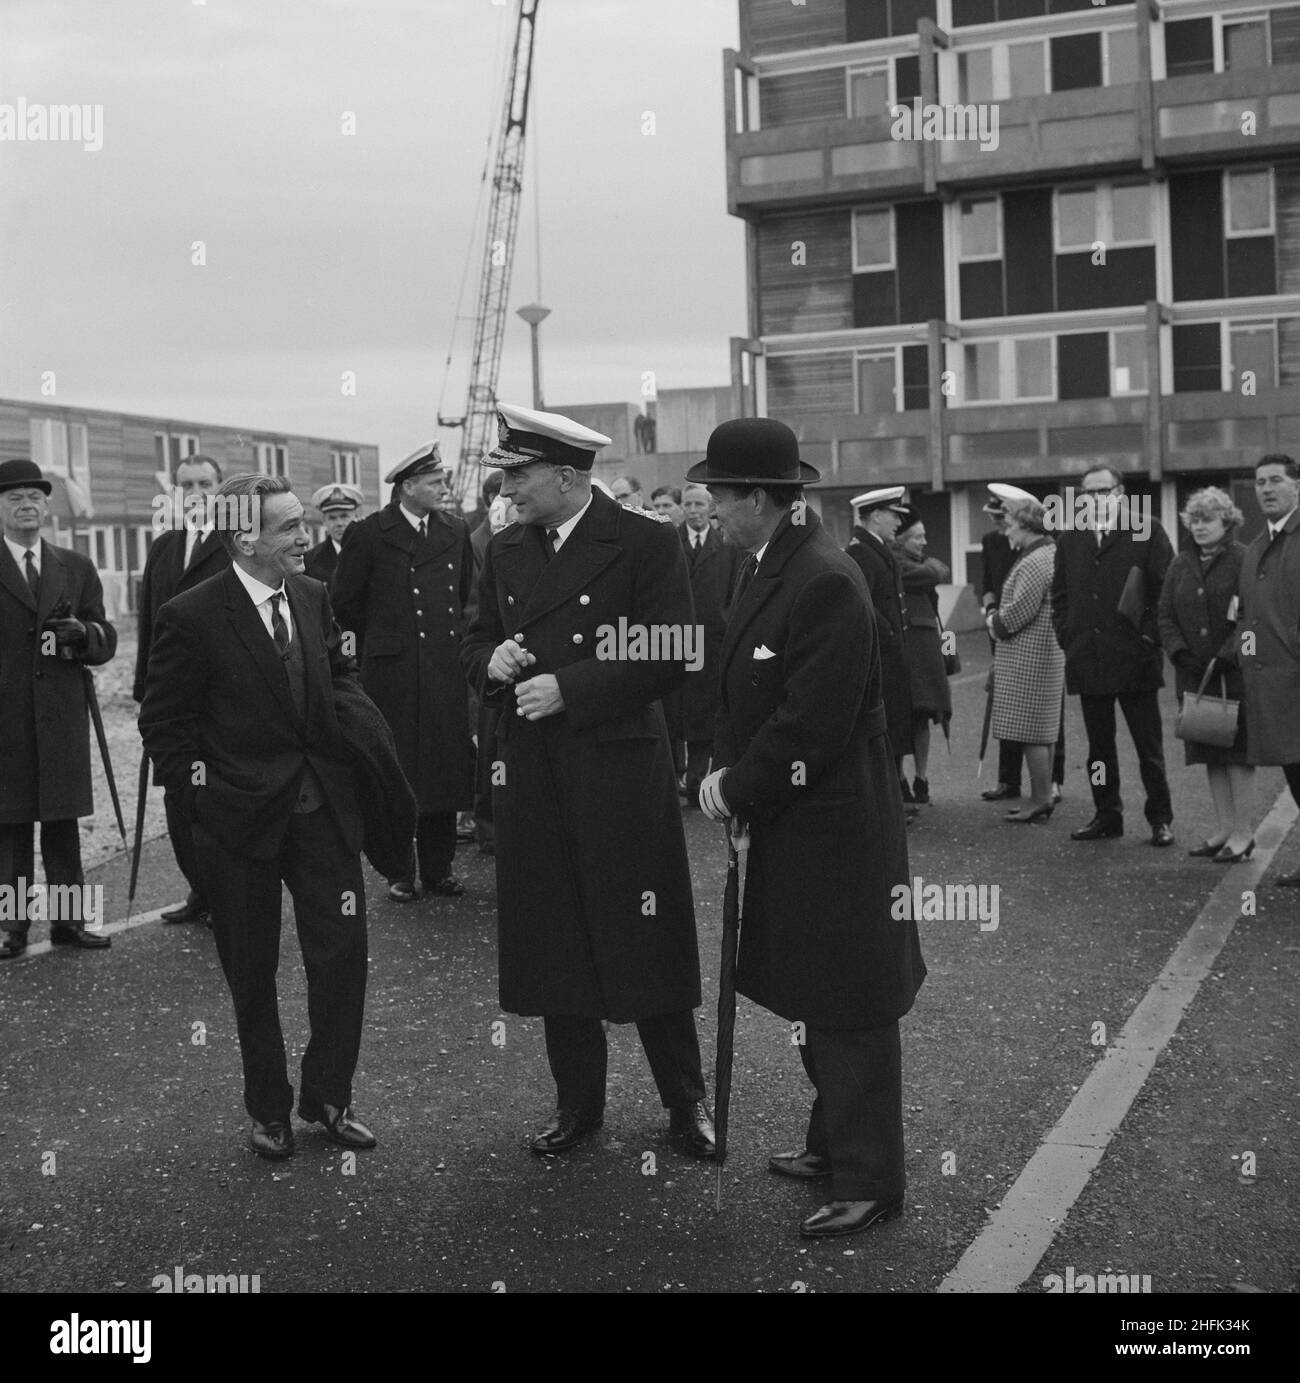 Royal Navy housing, Gosport, Hampshire, 06/12/1966. A group of people including staff from the Royal Navy at the opening of married quarters in Gosport. This Armed Services' housing estate of 1000 12M Jespersen flats and houses was built by the South London Region of Laing's construction company for Royal Navy families. An article and photographs about the event were published in January 1967 in Laing's monthly newsletter 'Team Spirit'. The Commander-in-Chief of Portsmouth, Admiral Sir Frank Hopkins, is seen with two Royal Navy VCs, Jame Joseph Magennis (left) and Thomas William Gould (right) Stock Photo